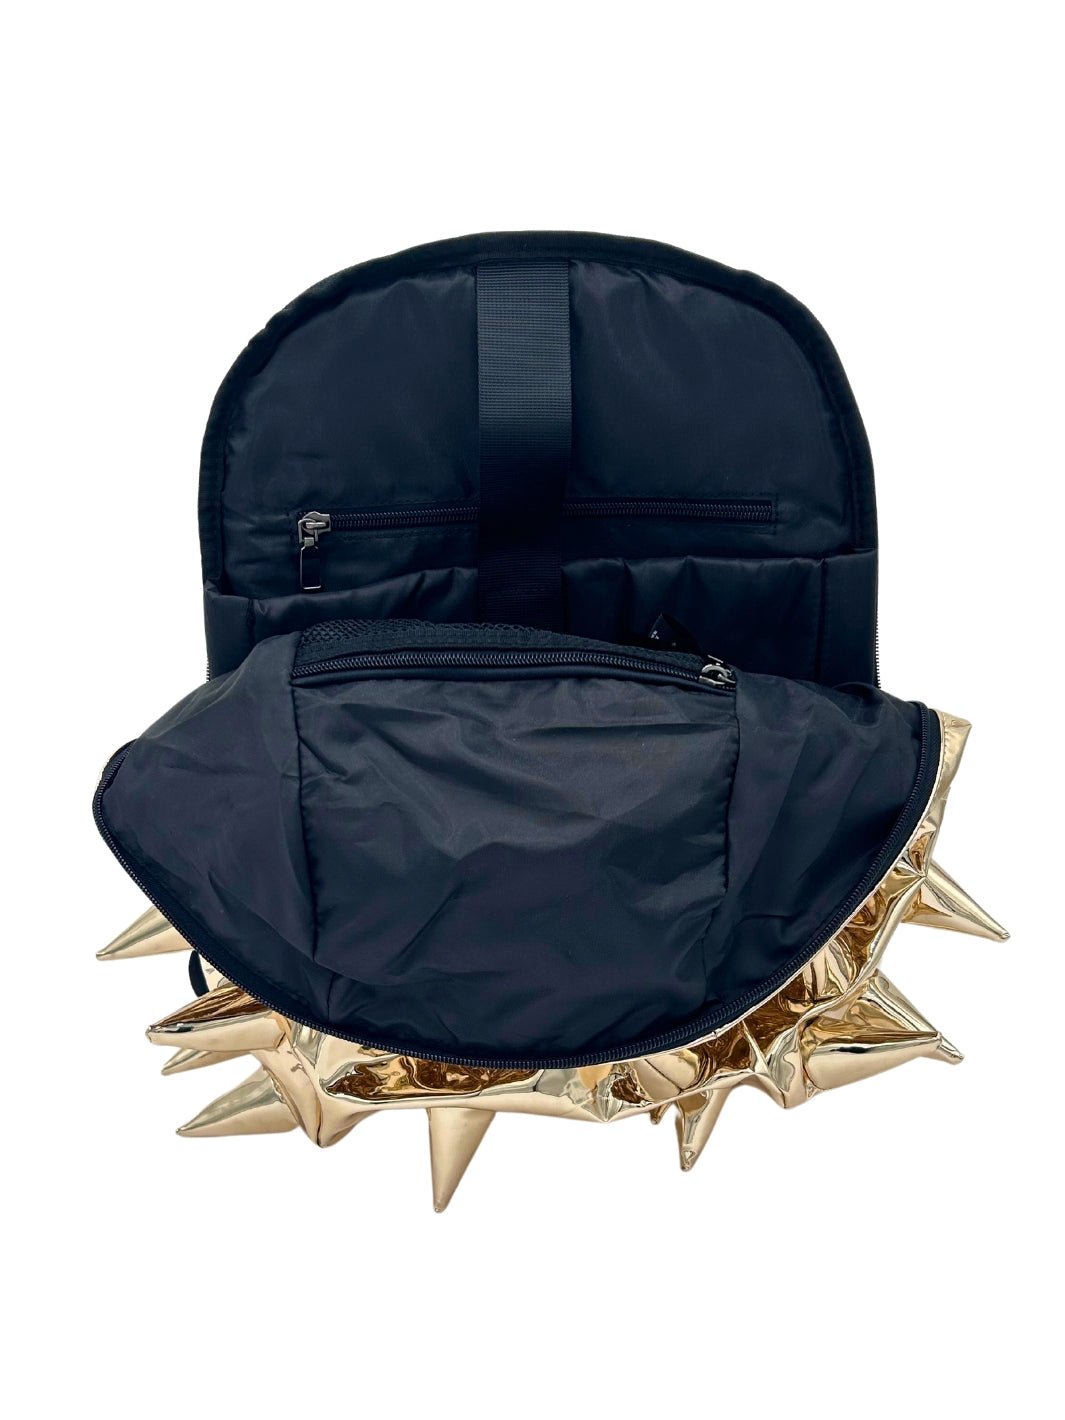 Inside View of 24 Karat Gold Backpack | Madpax